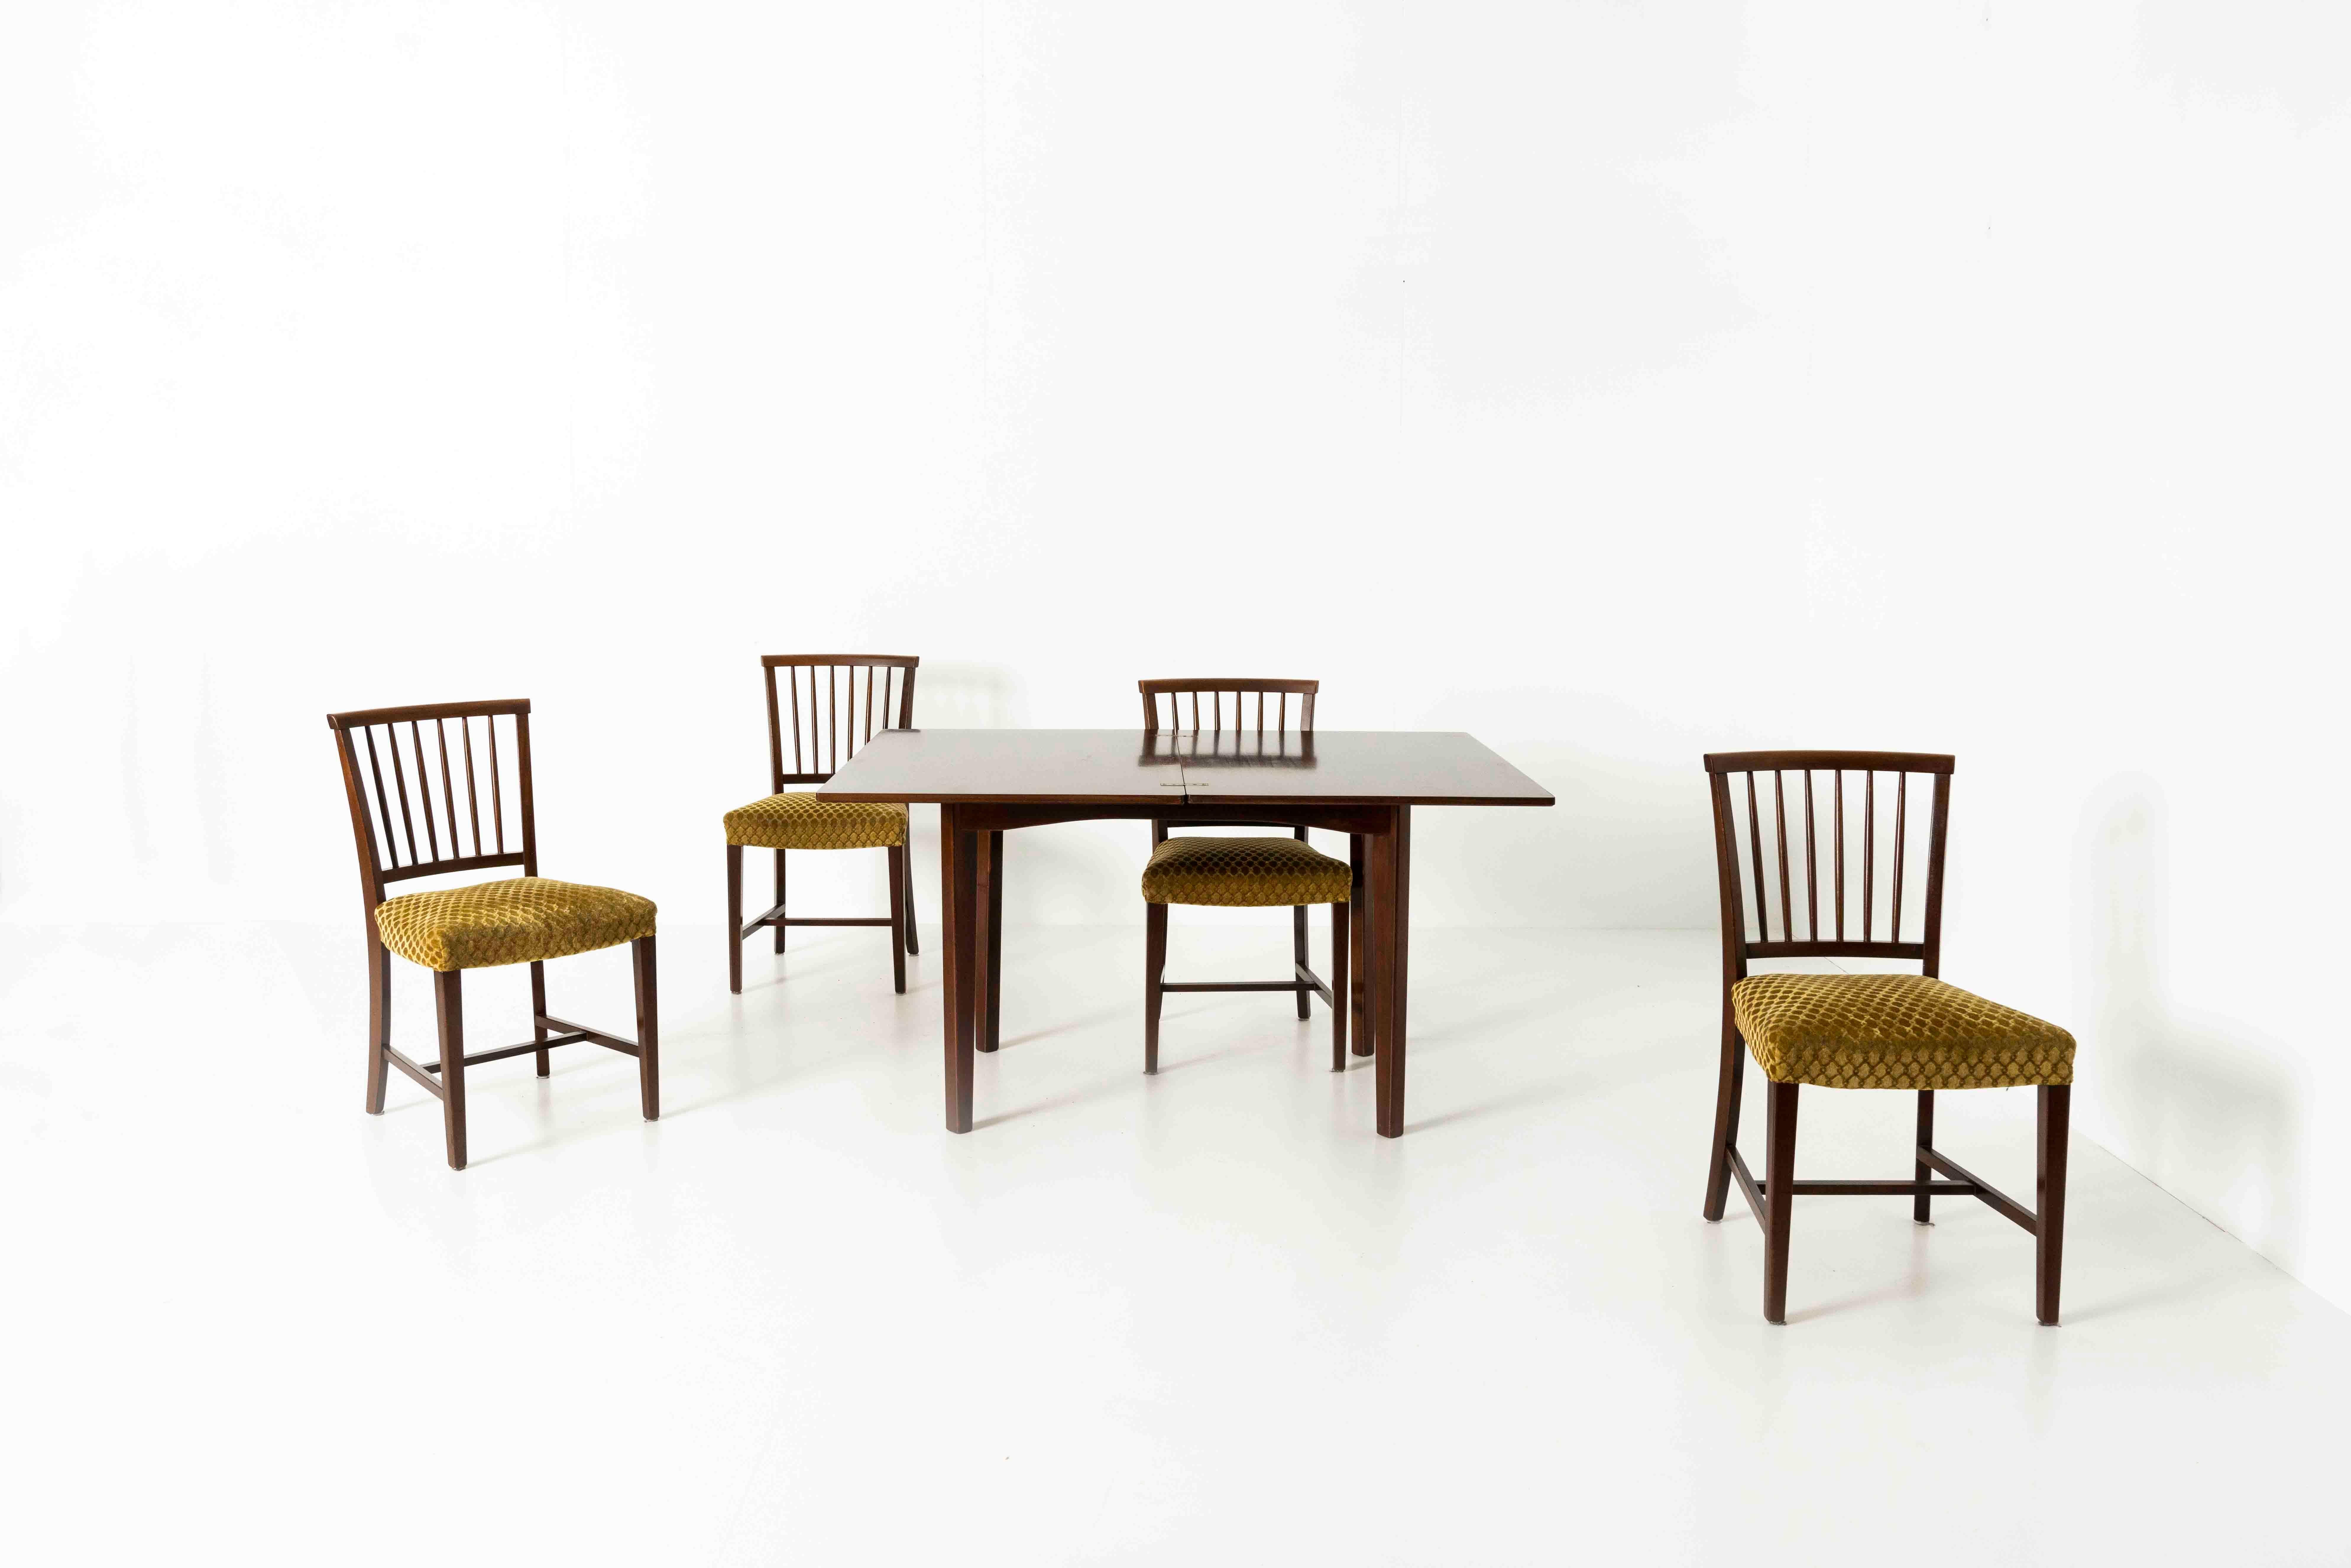 Nice set of four vintage dining chairs in wood and ocher yellow fabric, ca the 1960s. Although there is no clarity on the origin of these chairs, we feel it is a more traditional mid-century danish design. The chairs have a warm look and feel due to